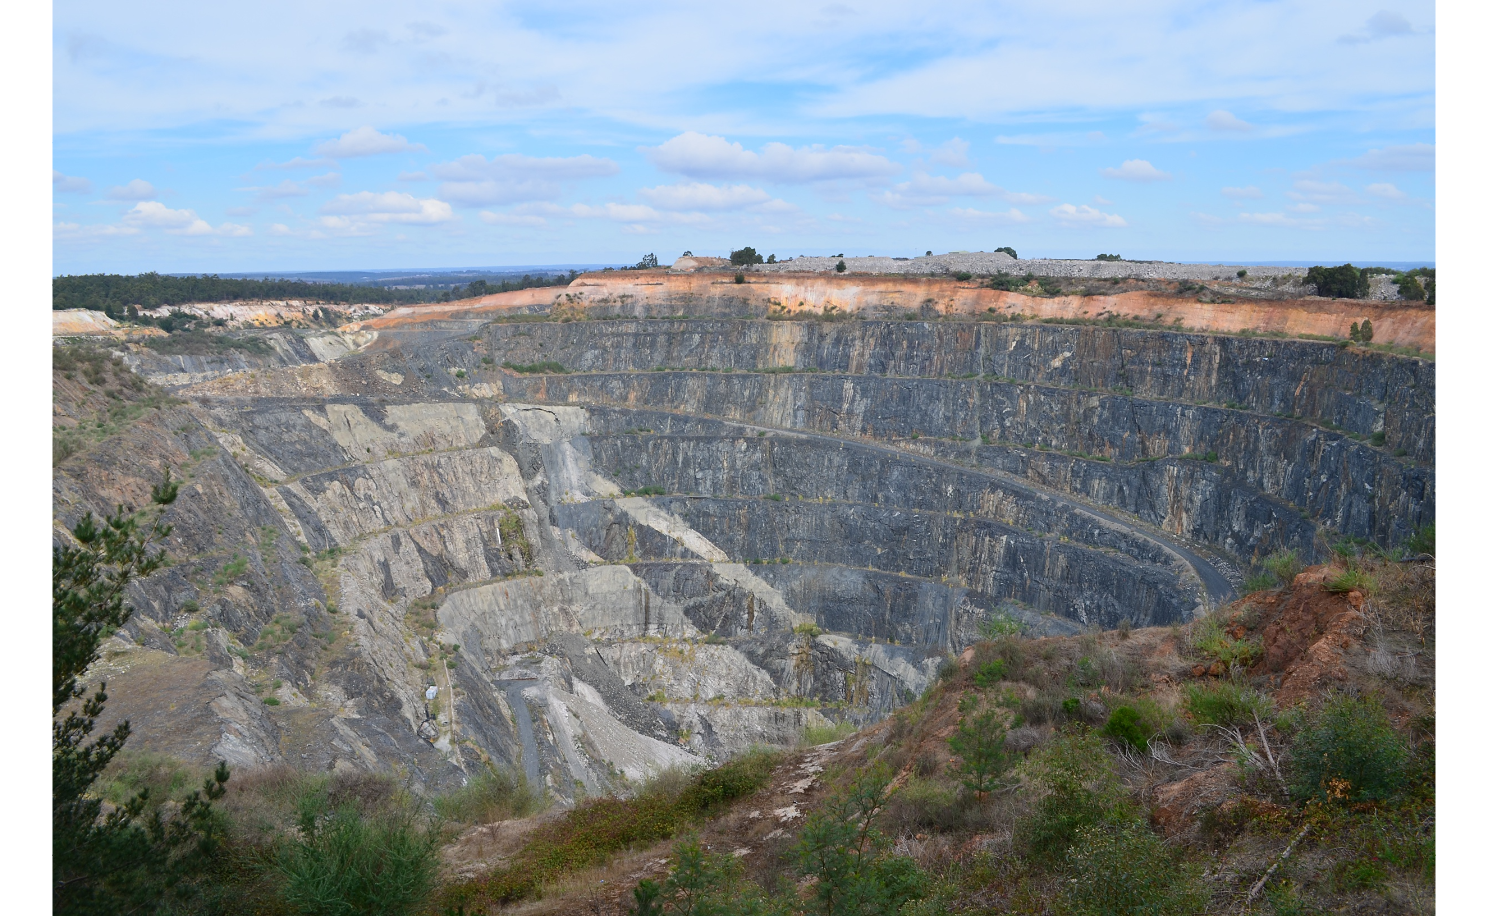 Cornwall Pit, Greenbushes Mine, WA. The pegmatite intrusions show as lighter bands. Source: Mindat.org